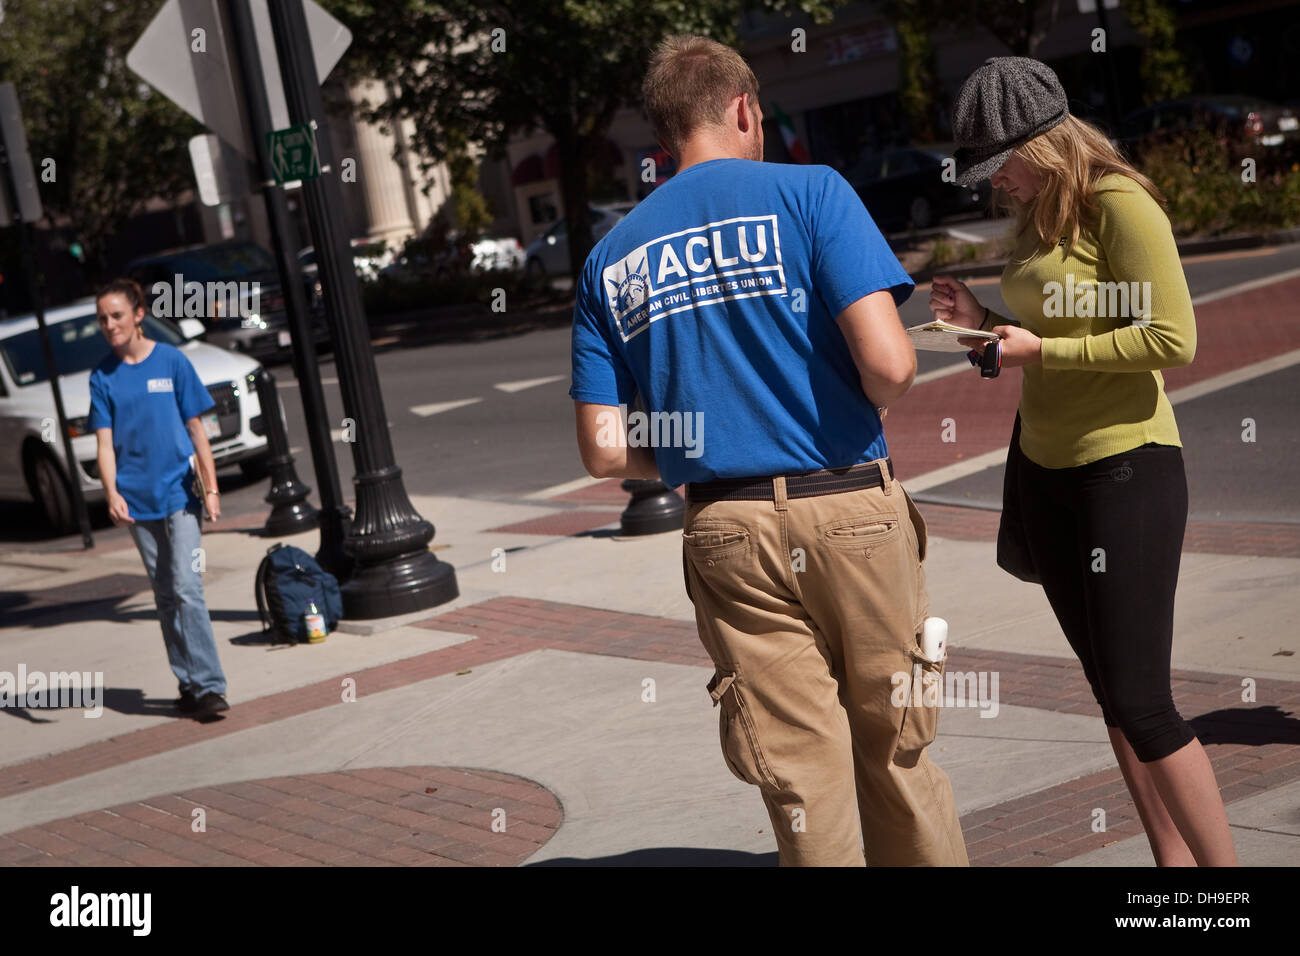 A man wearing an ACLU shirt asks a woman to sign a petition in Pittsfield, Massachusetts Stock Photo